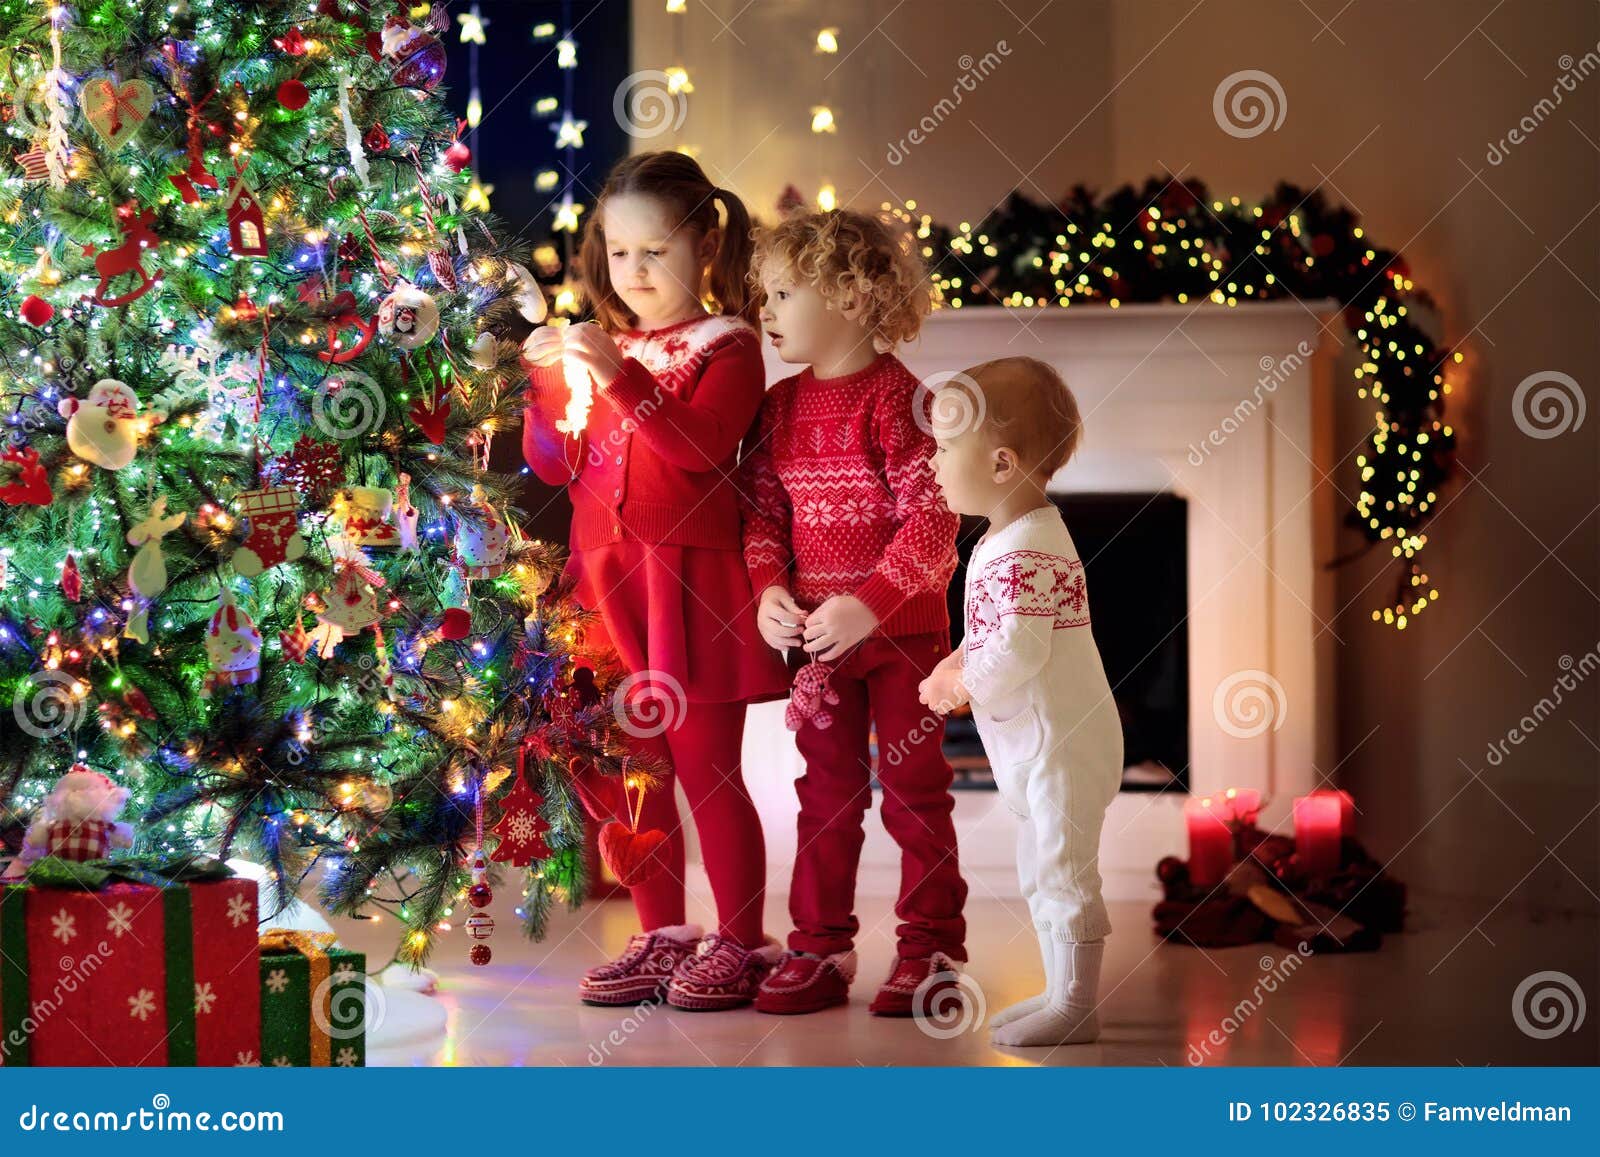 Children At Christmas Tree. Kids At Fireplace On Xmas Eve Stock Image - Image of kids, child ...